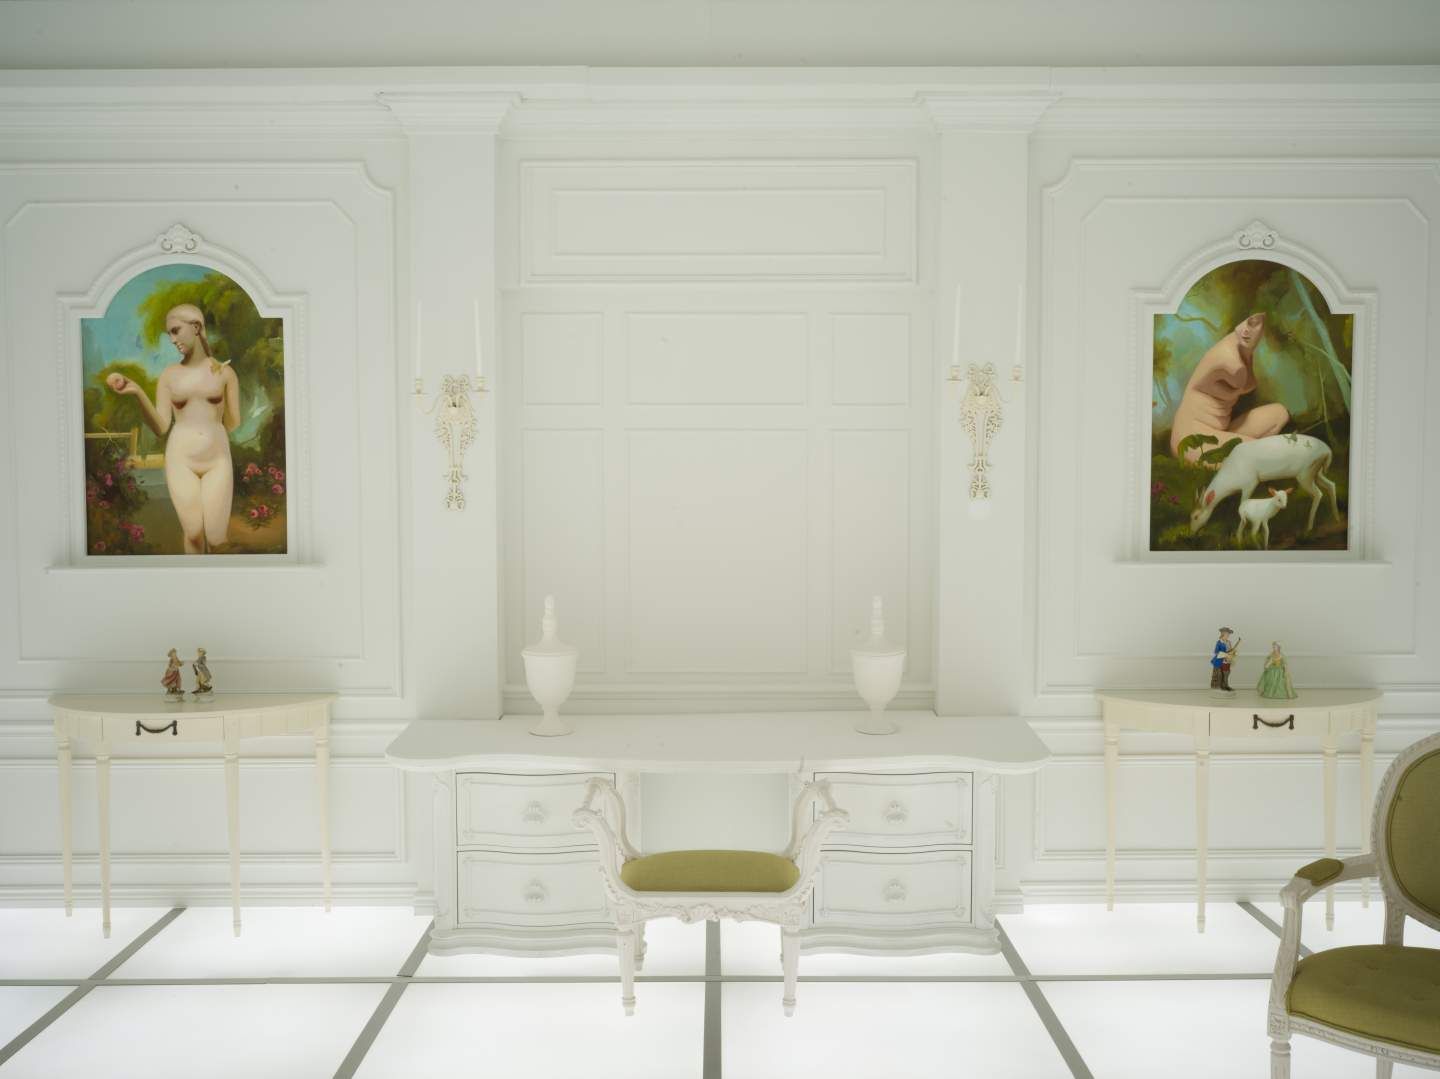 Walk Into the Weird White Room From '2001: A Space Odyssey' at the